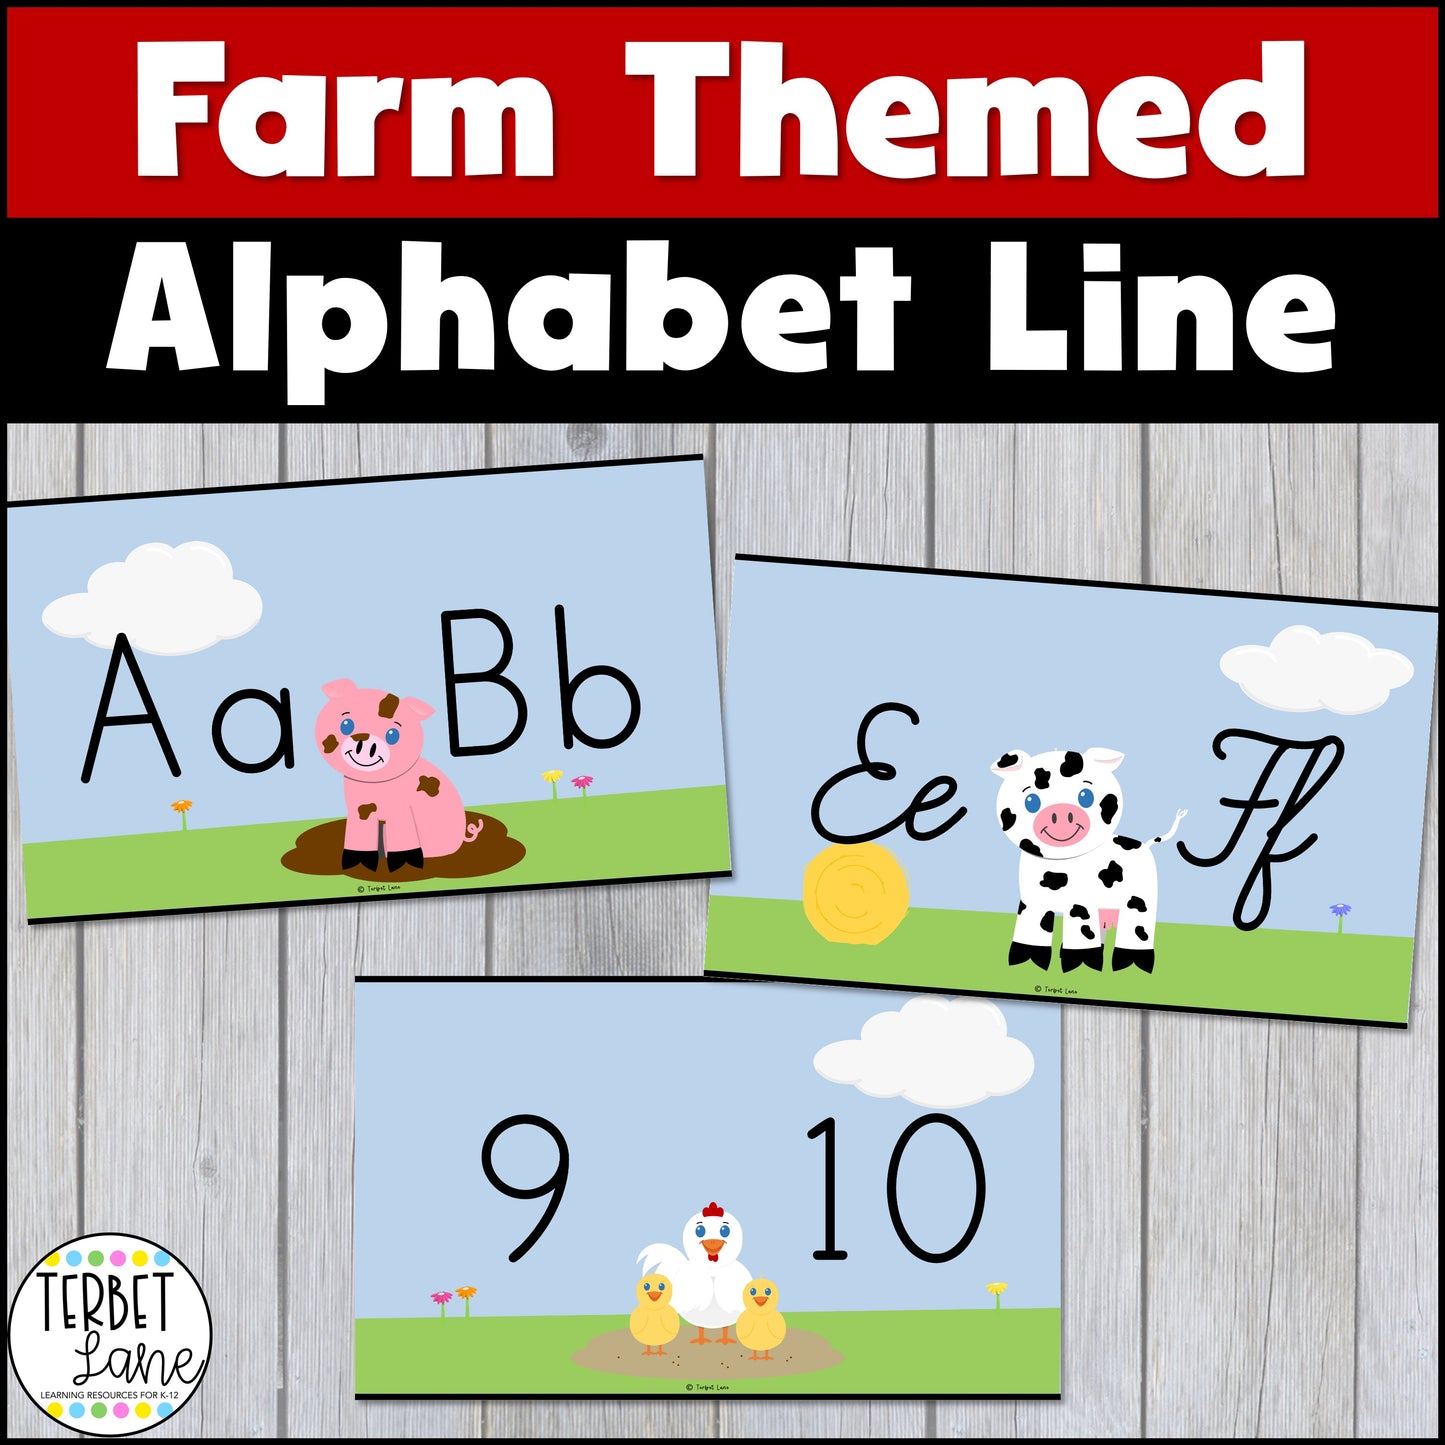 Farm Themed Alphabet Flashcards Uppercase and Lowercase Print & Cursive Posters